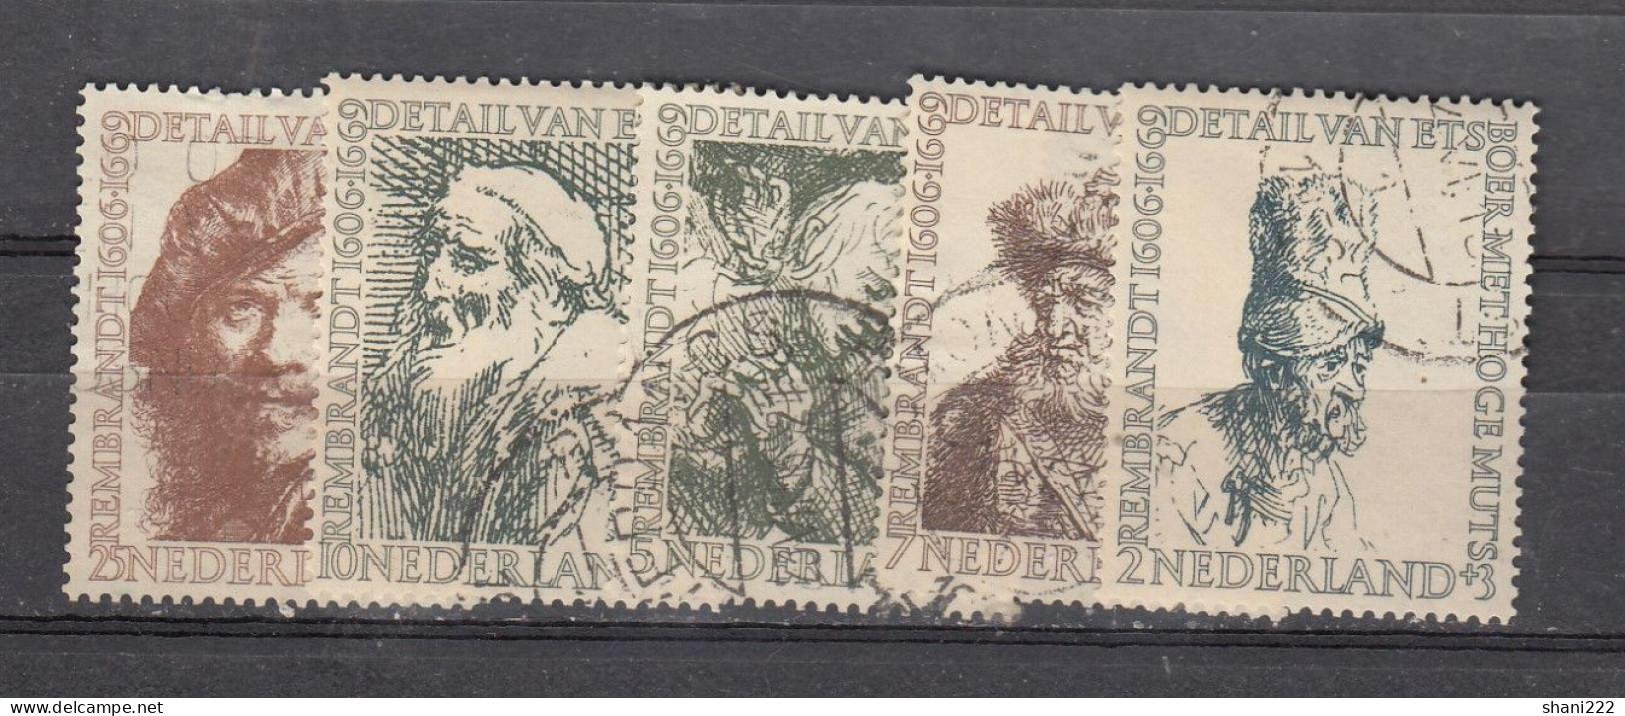 Netherlands 1956 Charity - Rembrandt  Used Set (e-851) - Used Stamps